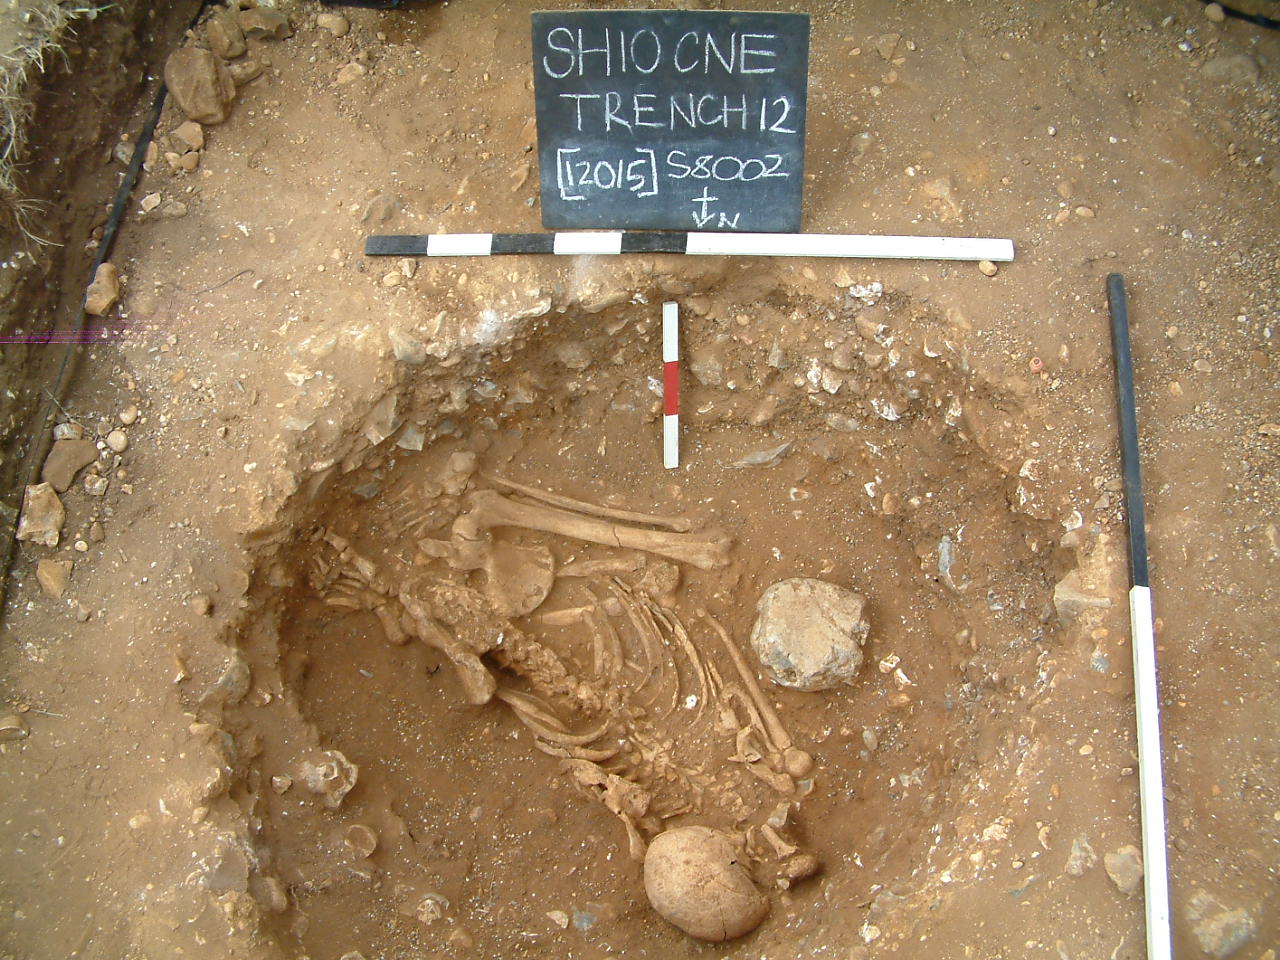 Crouched burial discovered in Chalkpit Field in 2010

With thanks to the SHARP project for the photo 